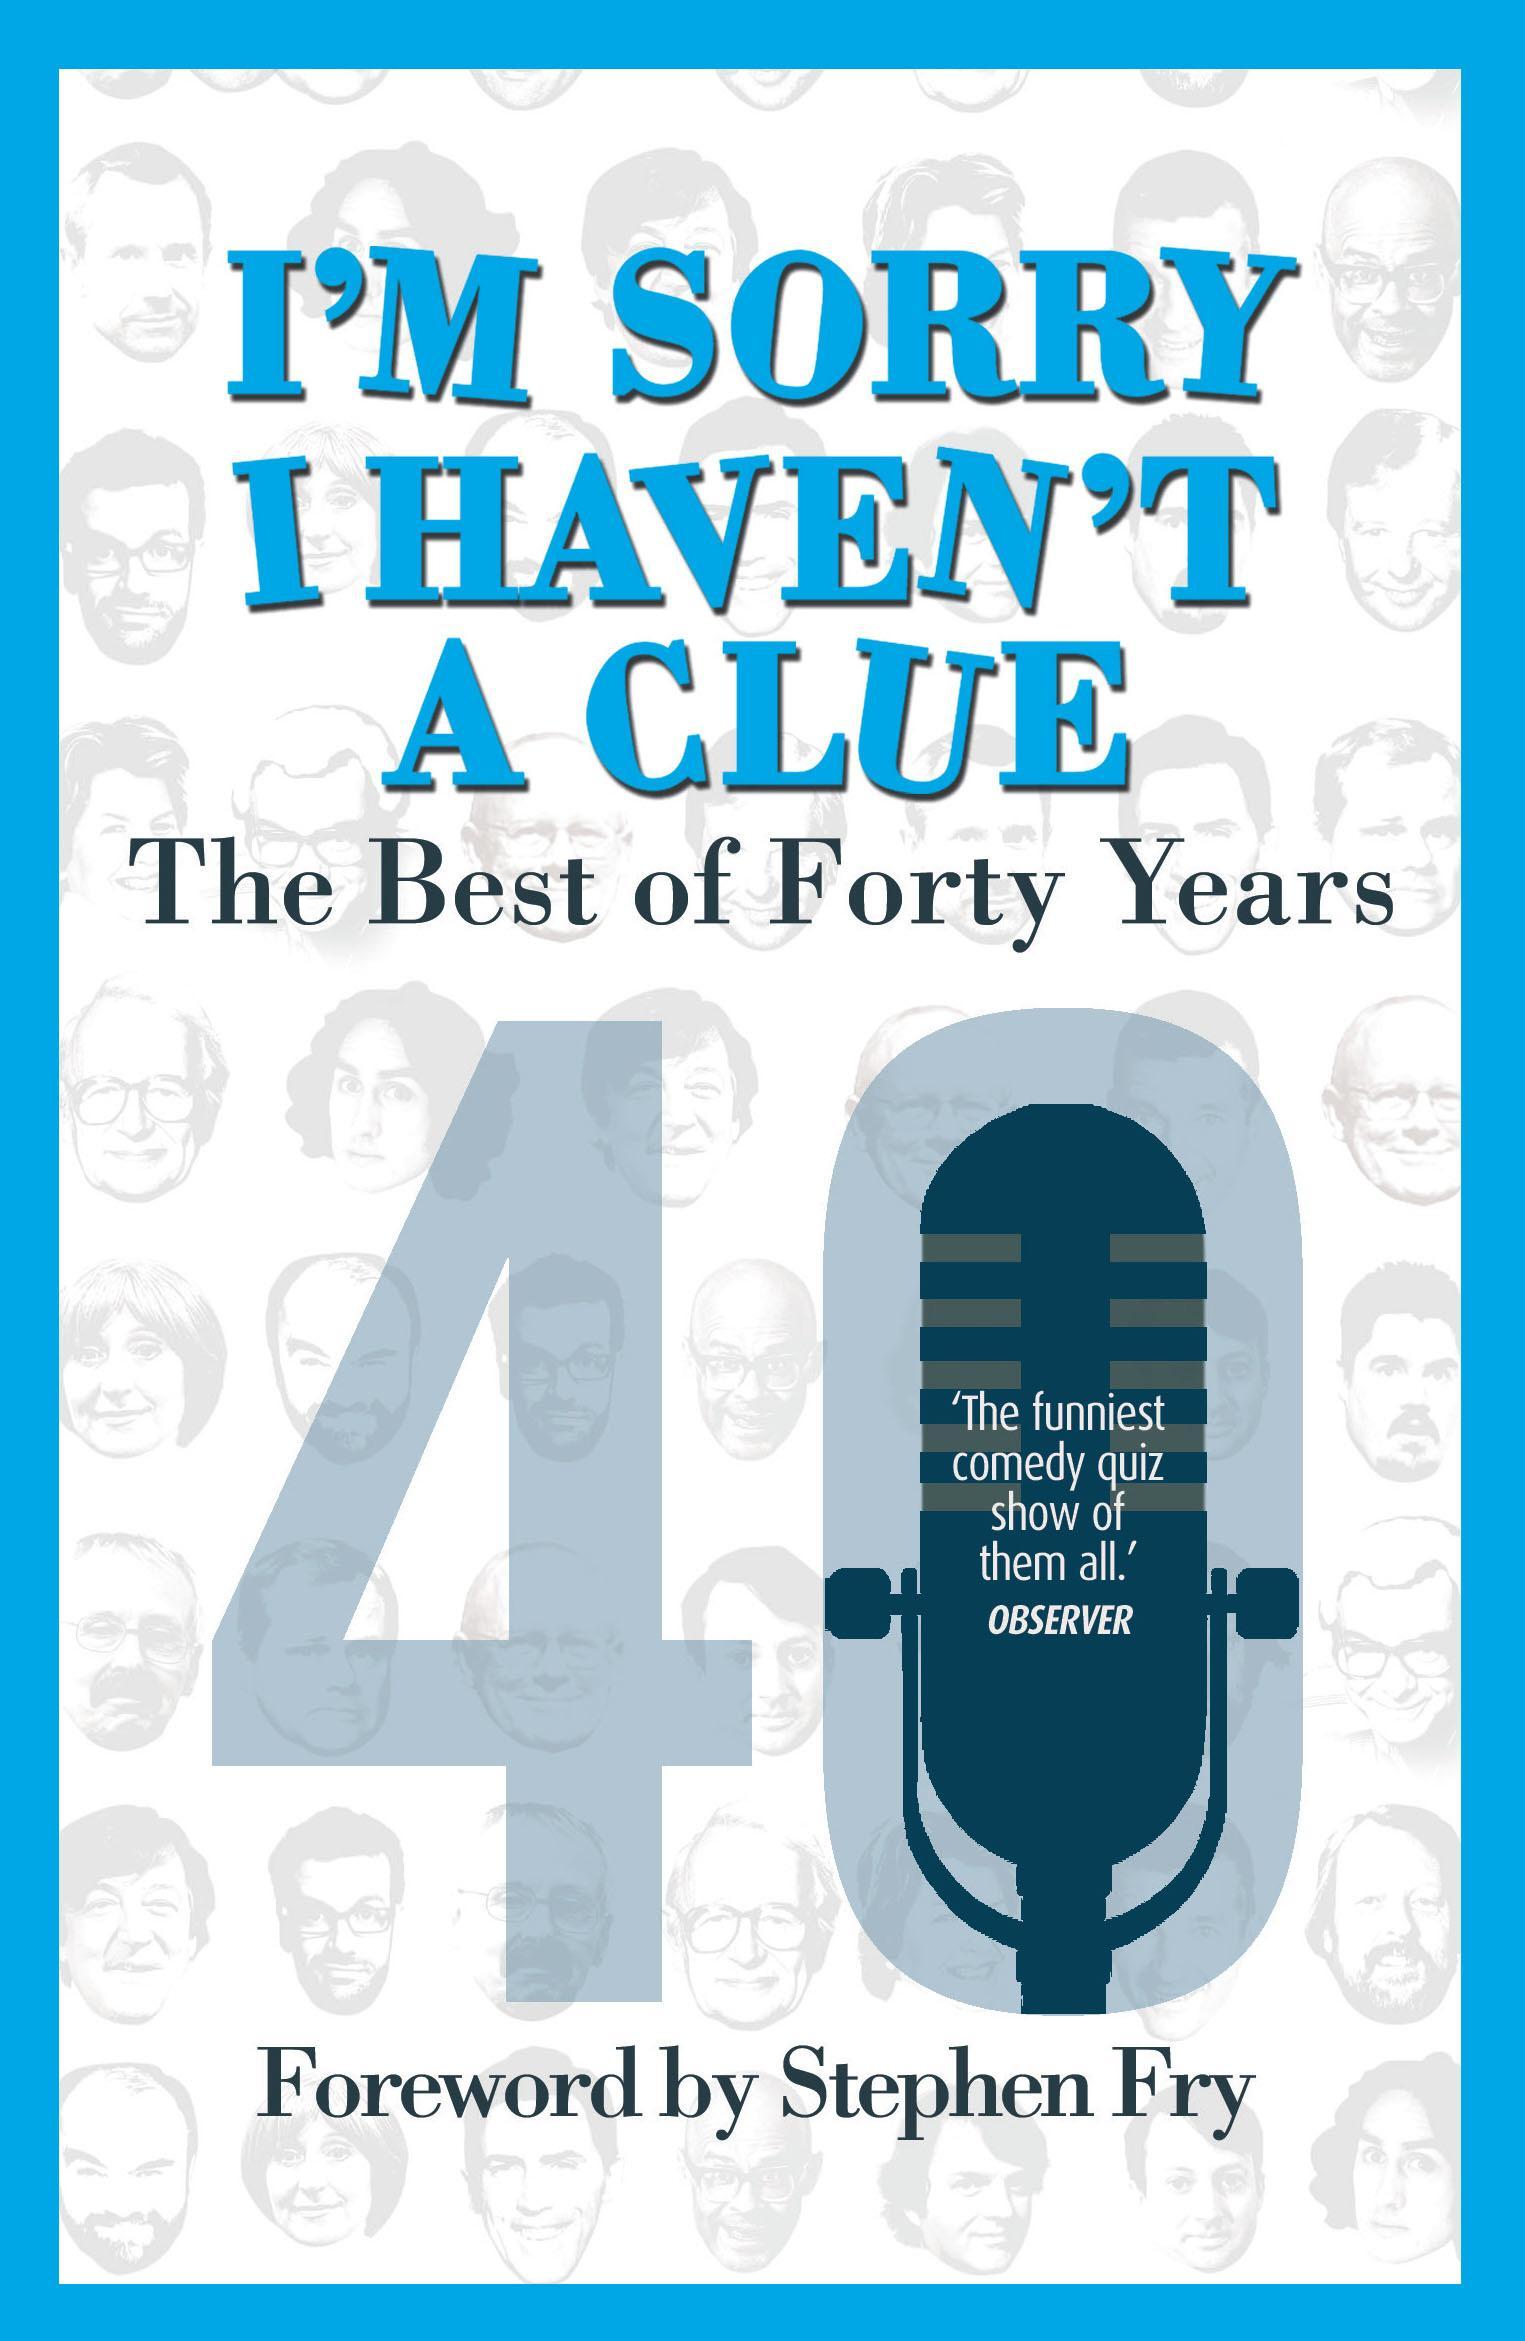 I'm Sorry I Haven't a Clue: The Best of Forty Years - Barry Cryer